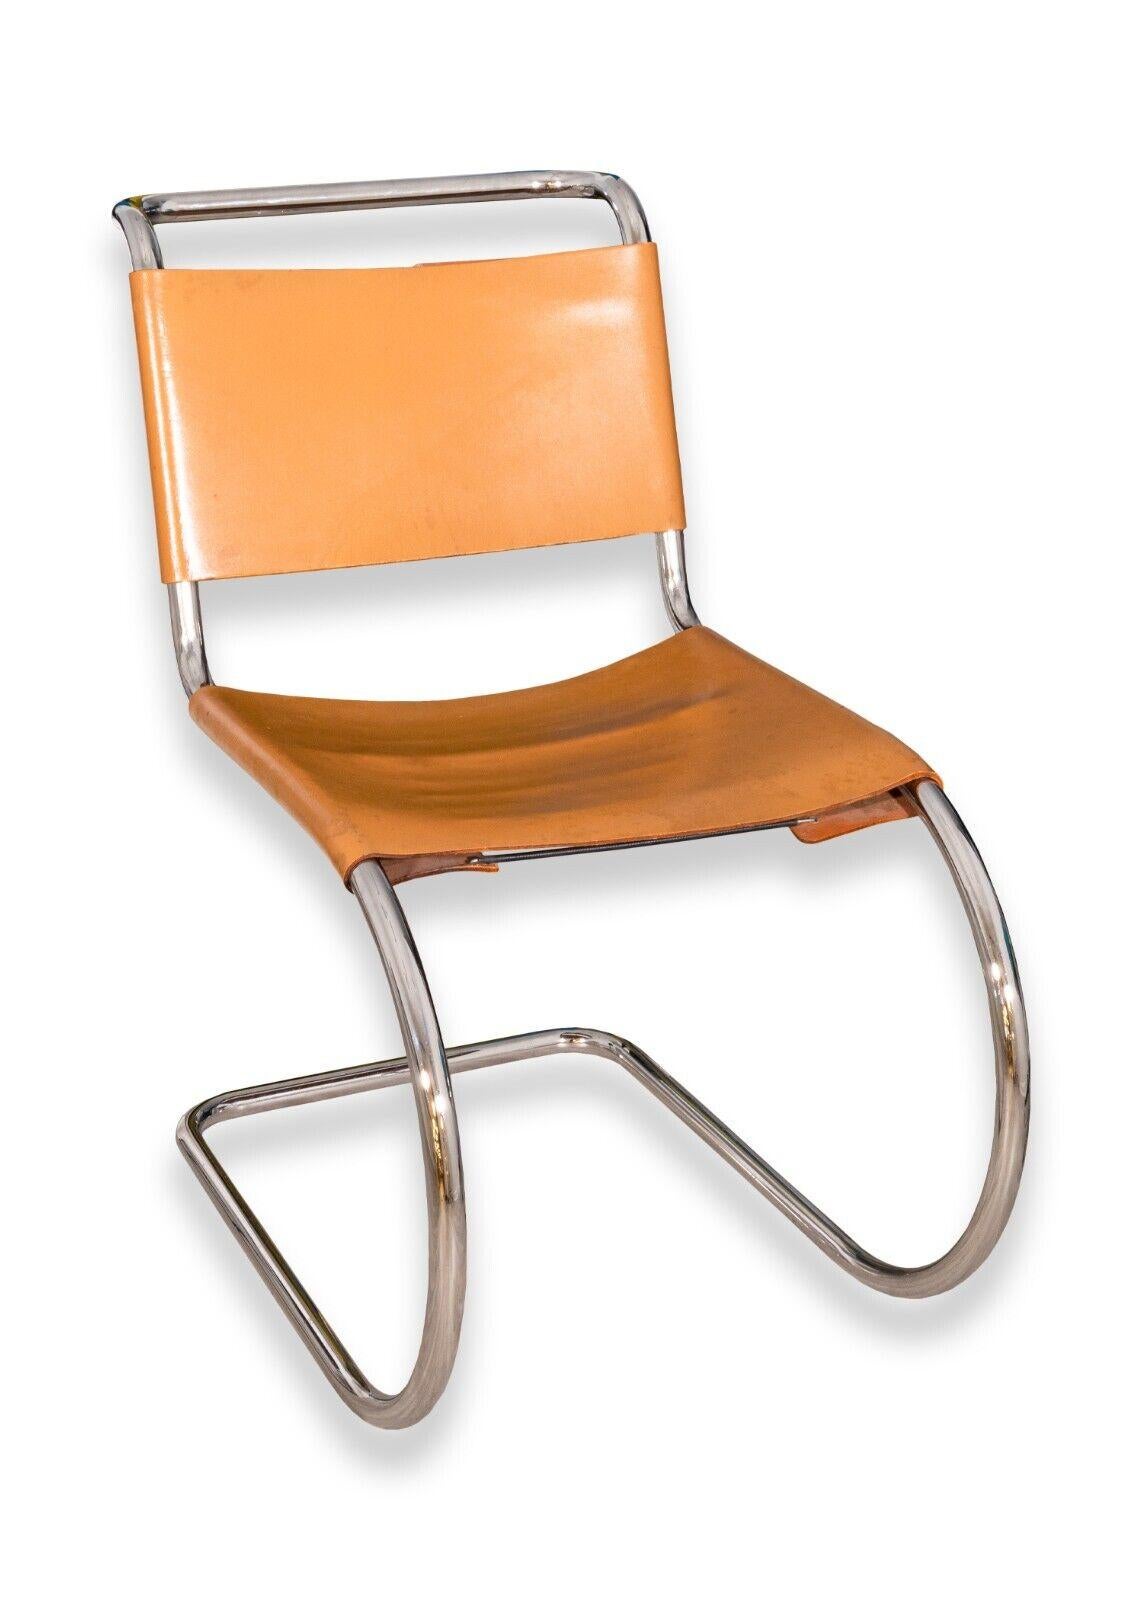 A mid century modern set of 6 Knoll Marcel Breuer cantilever leather chairs. This lovely set of mid century modern chairs are Marcel Breuer's cantilever leather chairs for Knoll. These dining chairs feature a tubular chrome metal frame, and